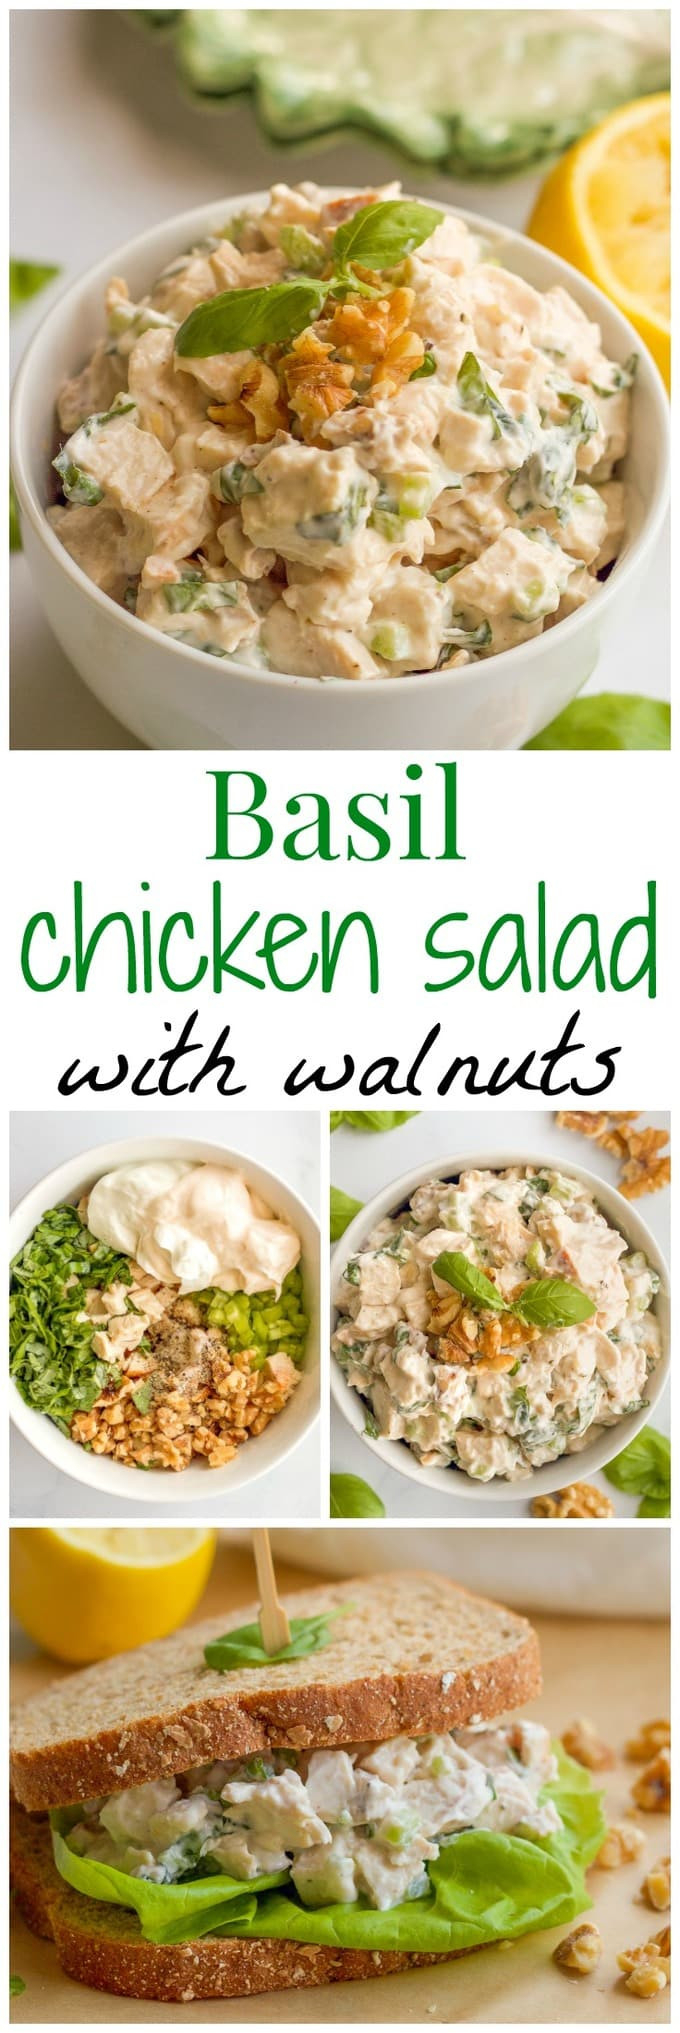 Basil Chicken Salad
 Healthy basil chicken salad with walnuts Family Food on